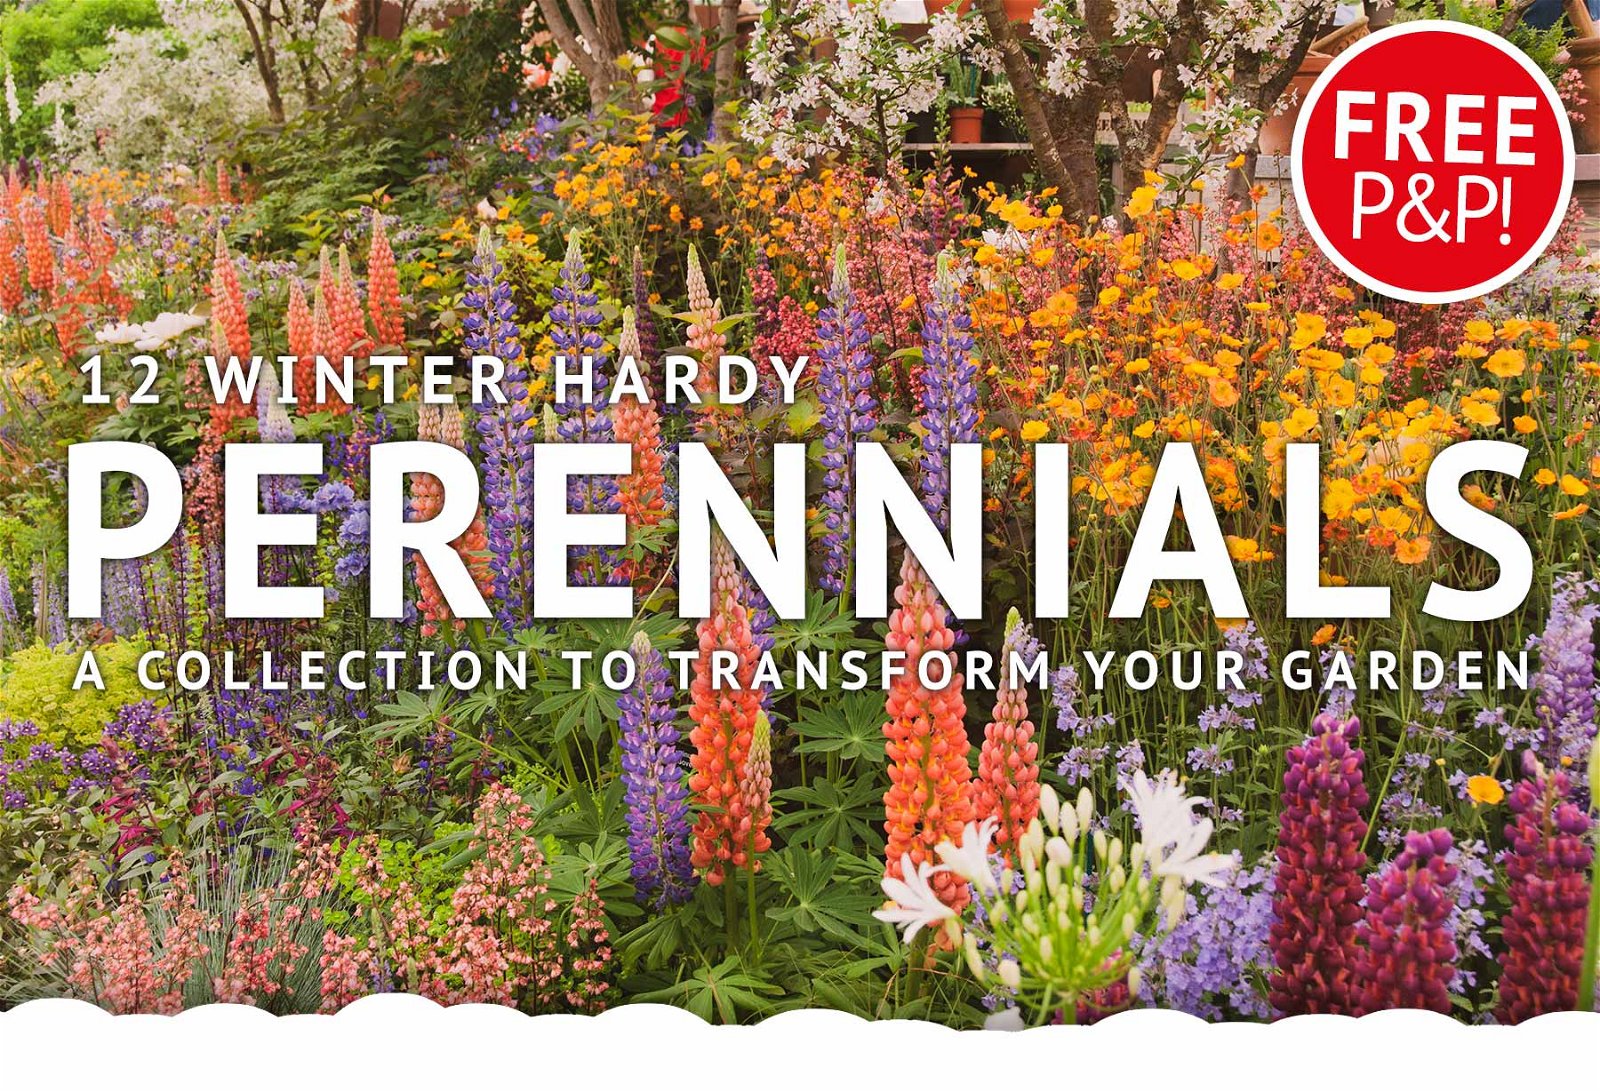 Free Delivery On 12 Hardy Perennials Just £1 Per Plant